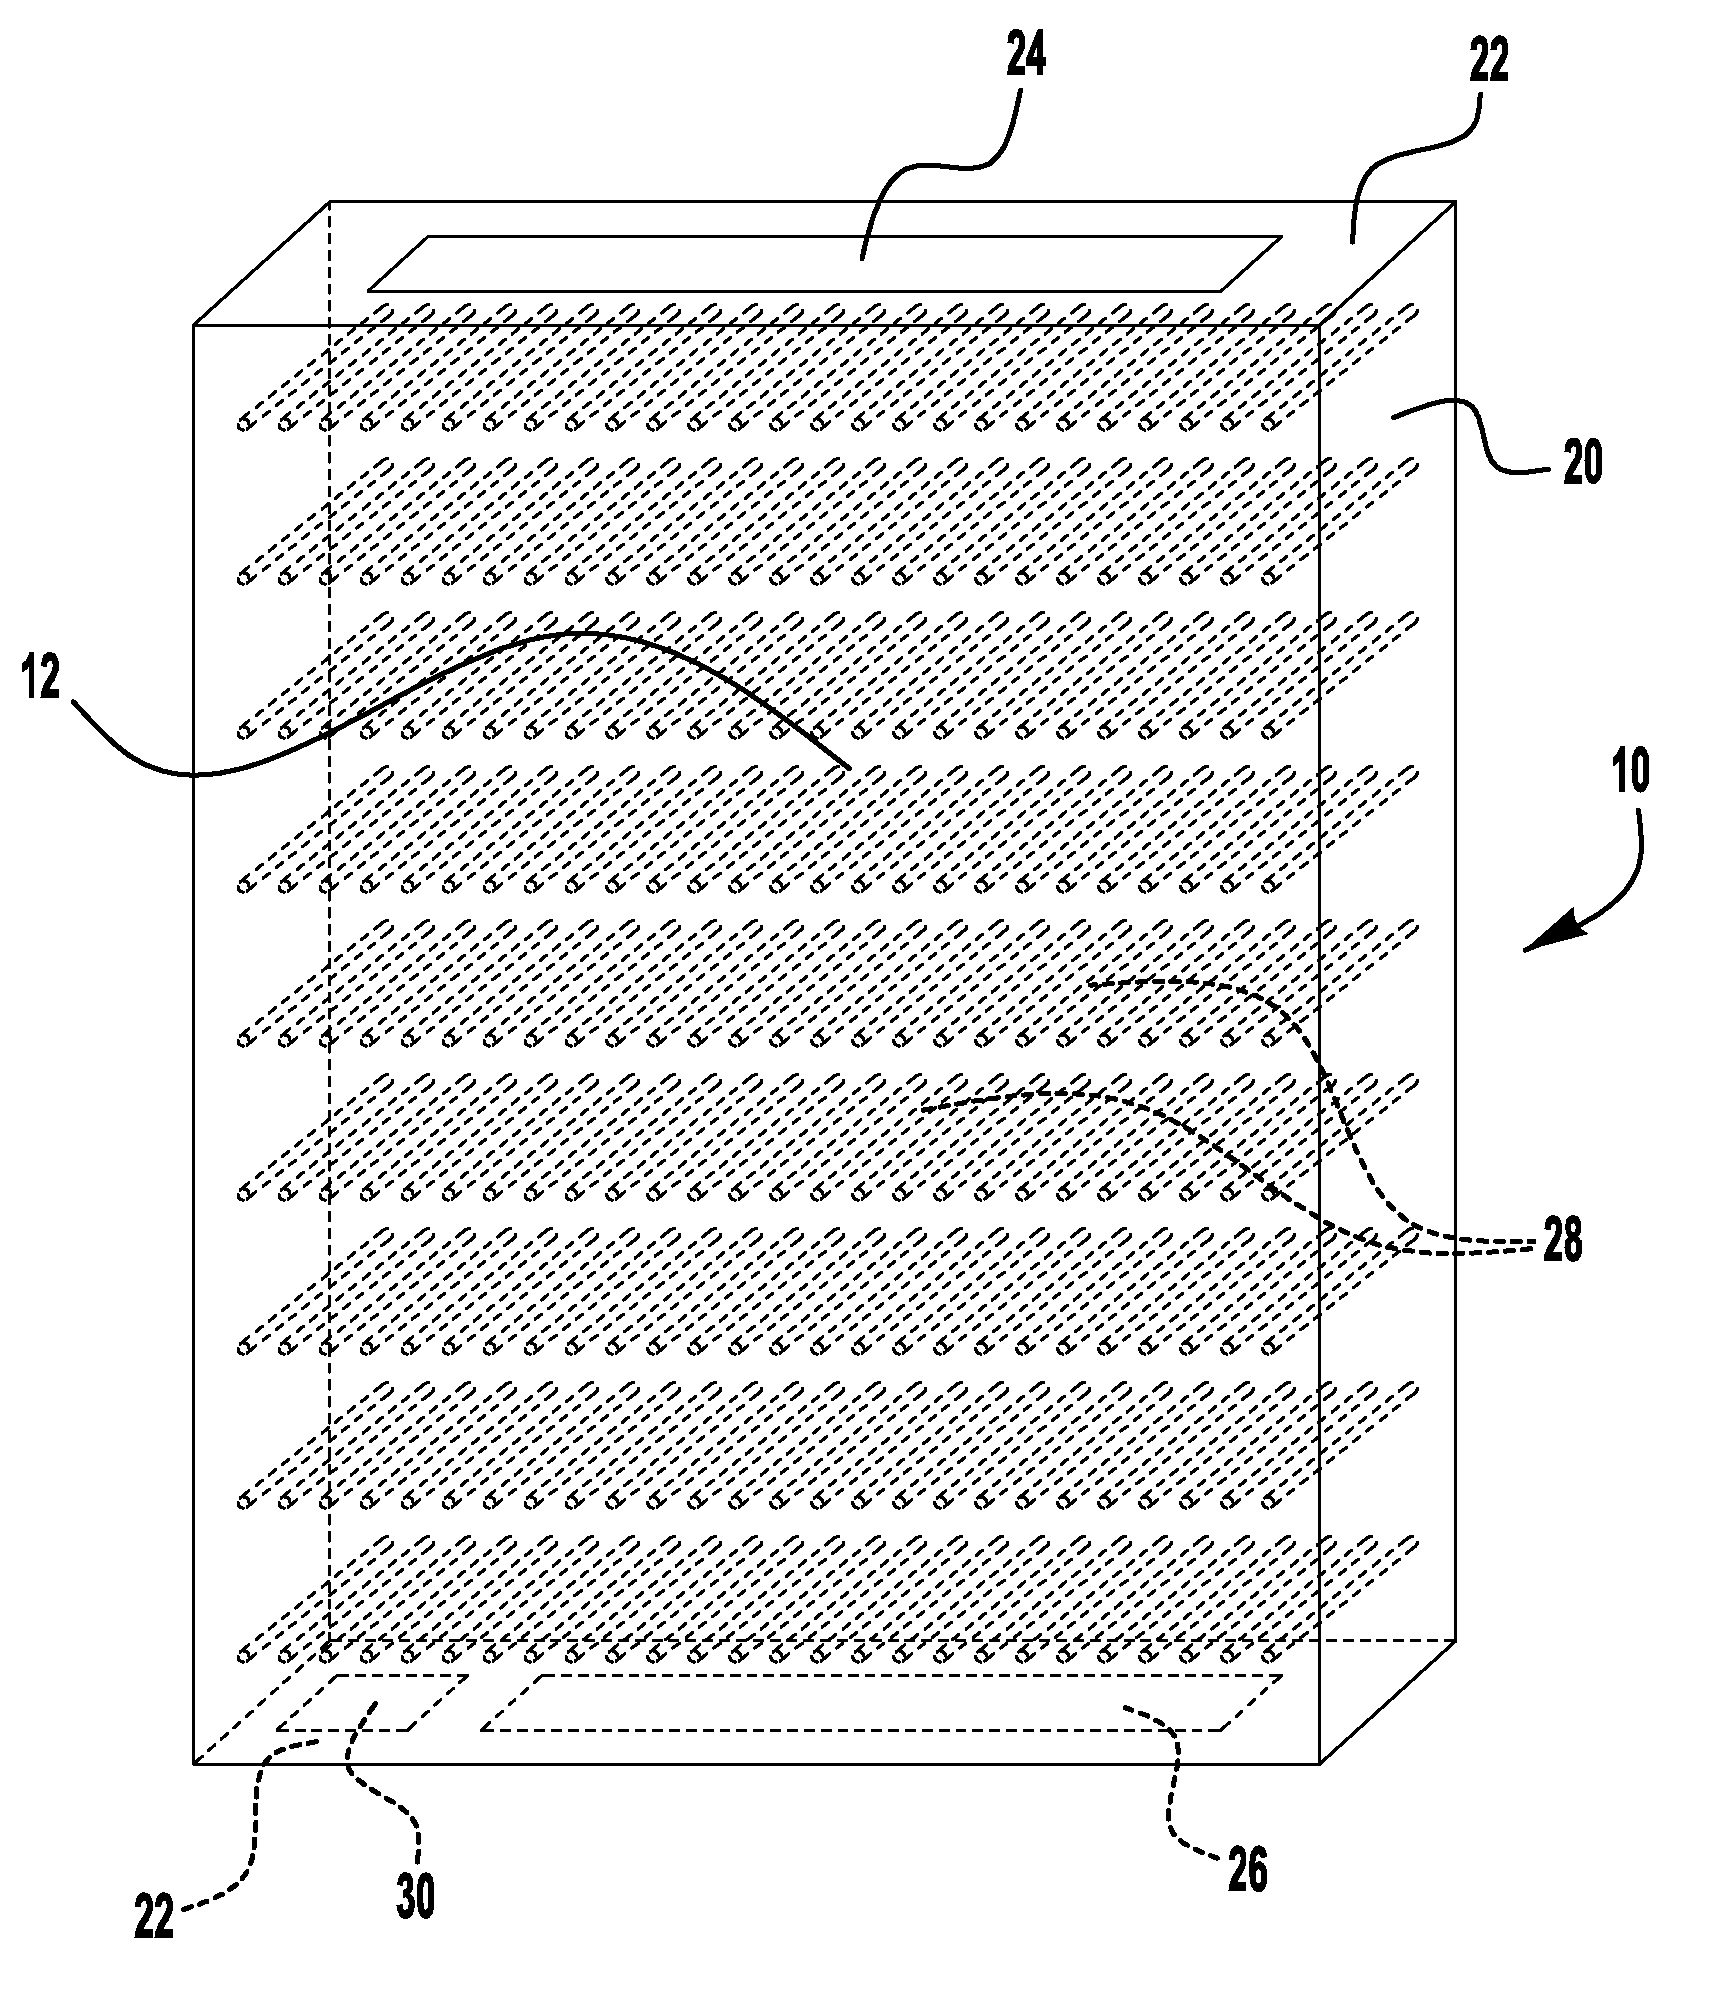 Lateral displacement array for microfiltration